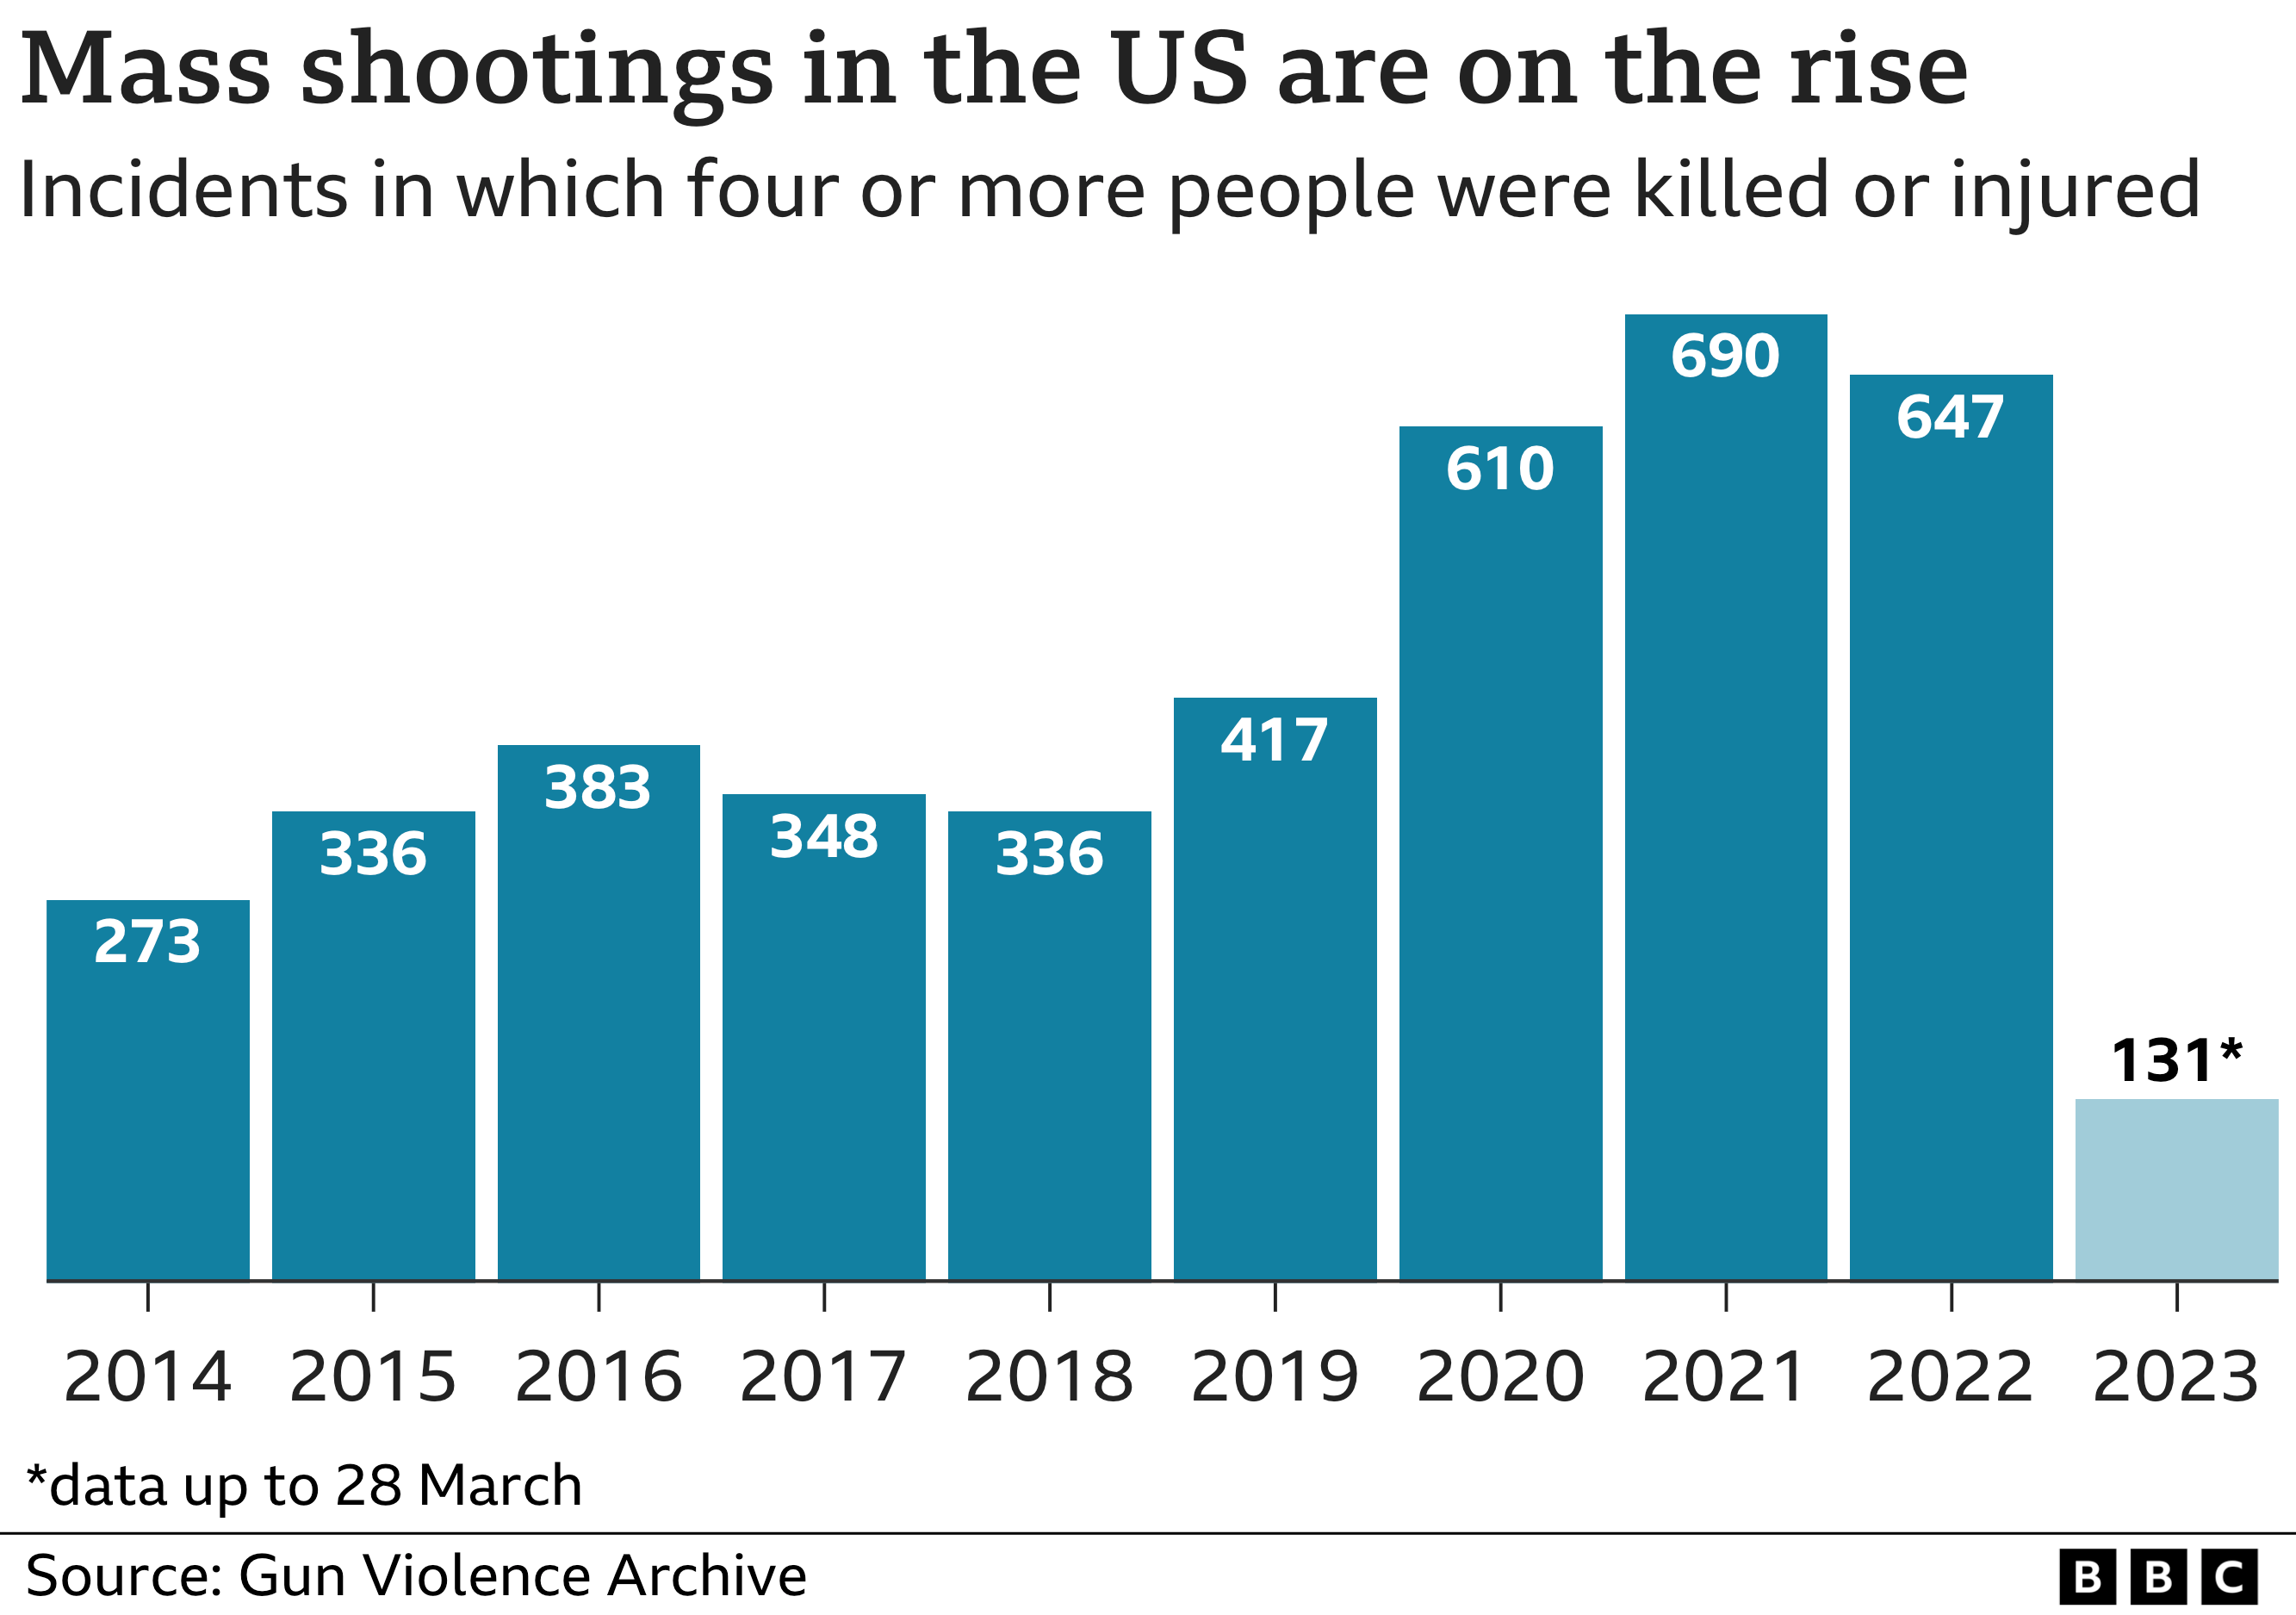 Mass shootings chart show di number of mass shooting events for di US since 2014 when na about 73 to 2023 when there have been 131 so far, according to the Gun Violence Archive. The worst year was 2021 with 690 mass shootings recorded